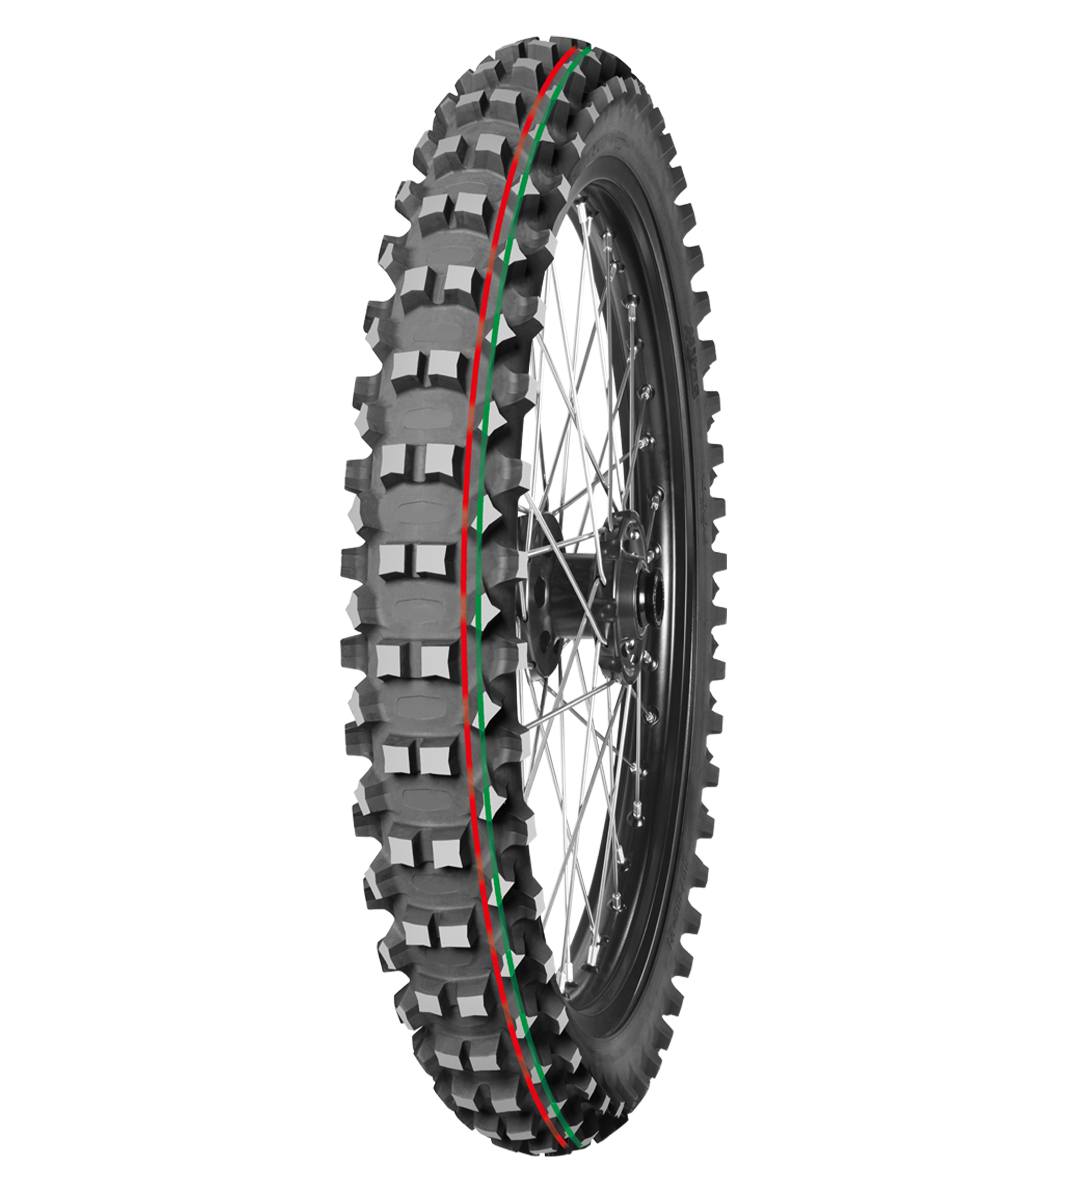 Mitas TERRA FORCE-MX MH 60/100-12 Motocross Competition Off-Road MEDIUM TO HARD 36J Red & Green Tube Front Tire, 226040, 60/100-12, Front, Motocross, Motocross Competition, Off-Road, Terra Force, Terra Force-MX MH, Trail, Tires - Imported and distributed in North & South America by Lindeco Genuine Powersports - Premier Powersports Equipment and Accessories for Motorcycle Enthusiasts, Professional Riders and Dealers.